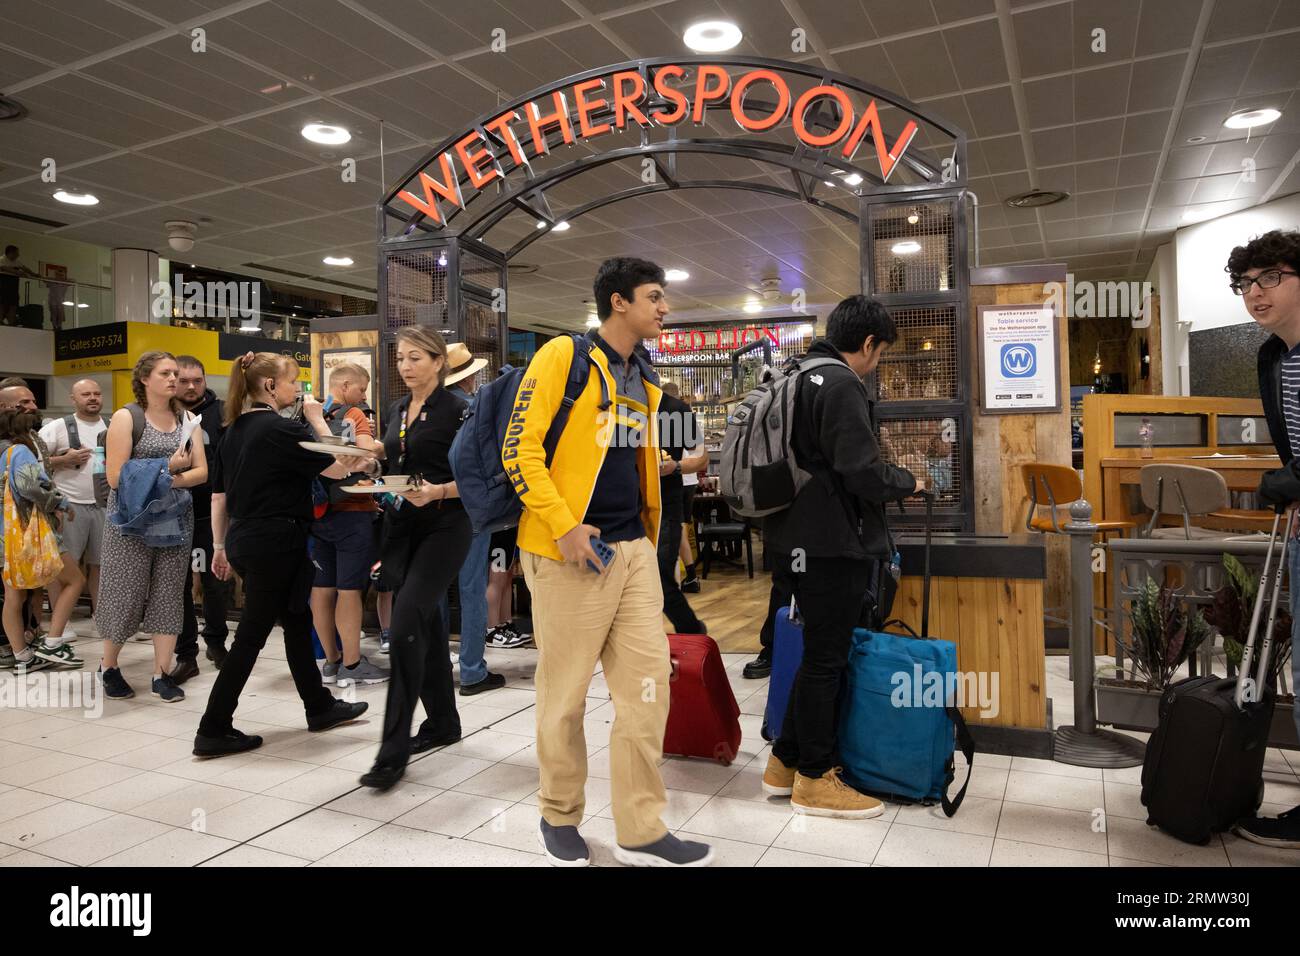 Wetherspoon pub restaurant in the departure lounge at Gatwick North airport terminal, England, UK Stock Photo